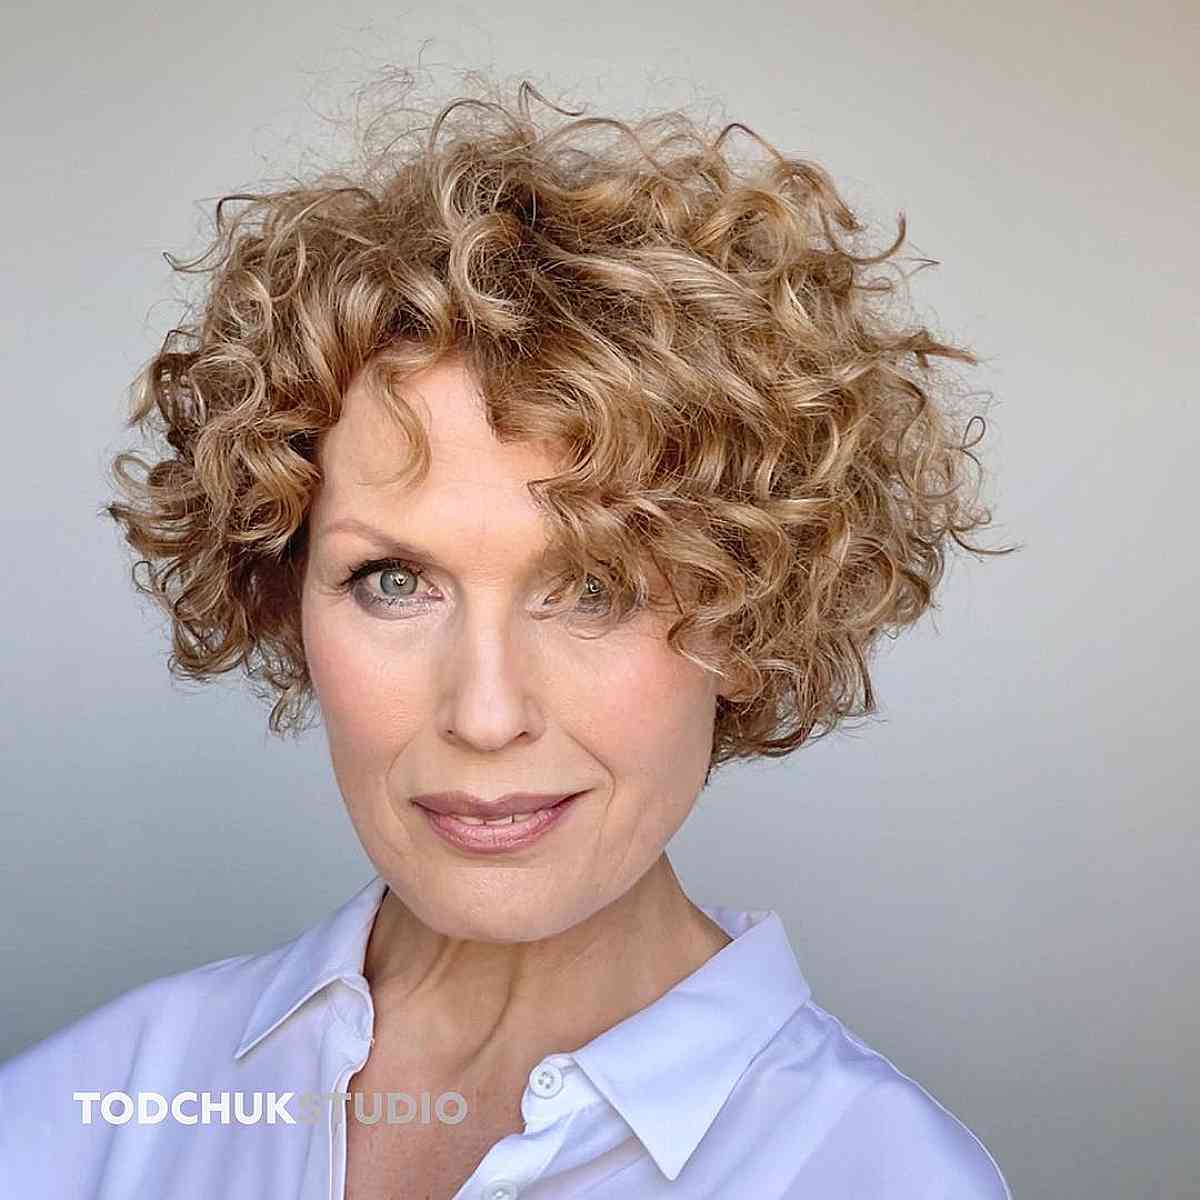 Short curly bob style for women over 50 years old